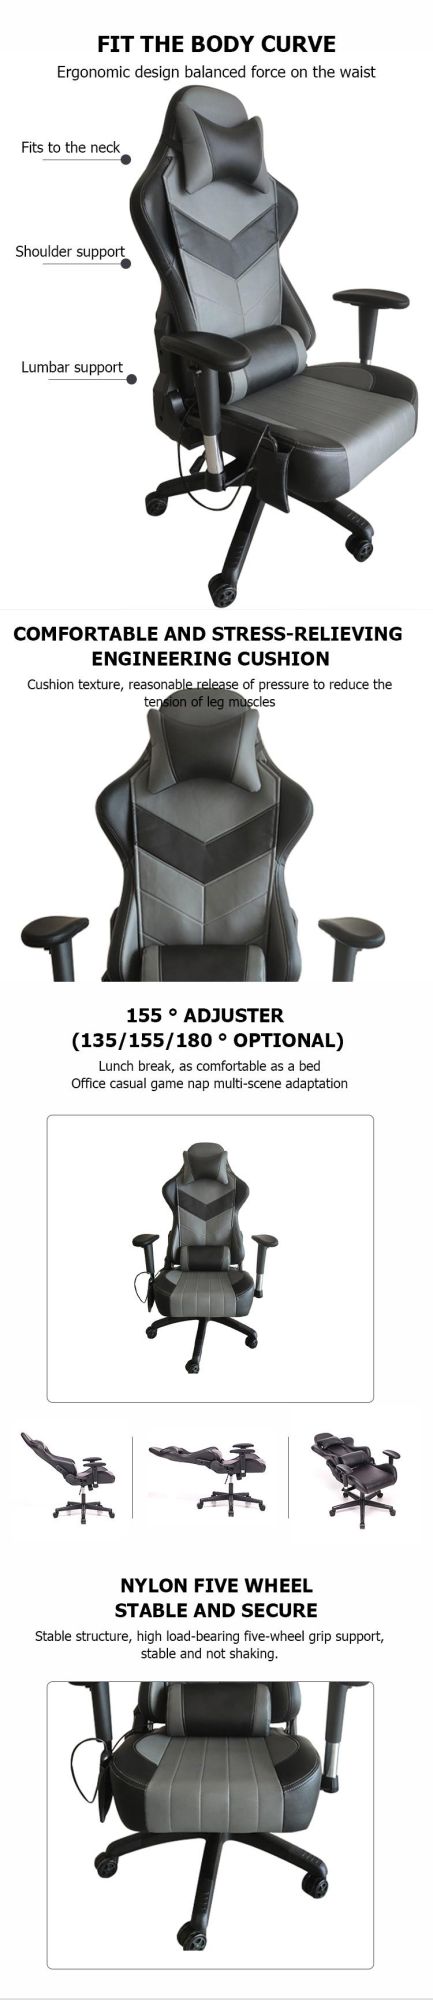 New Style Wholesale PVC Leather Fabric Game Lounge Chair Adjustable Colorful Design High Quality Office Chair Home Furniture